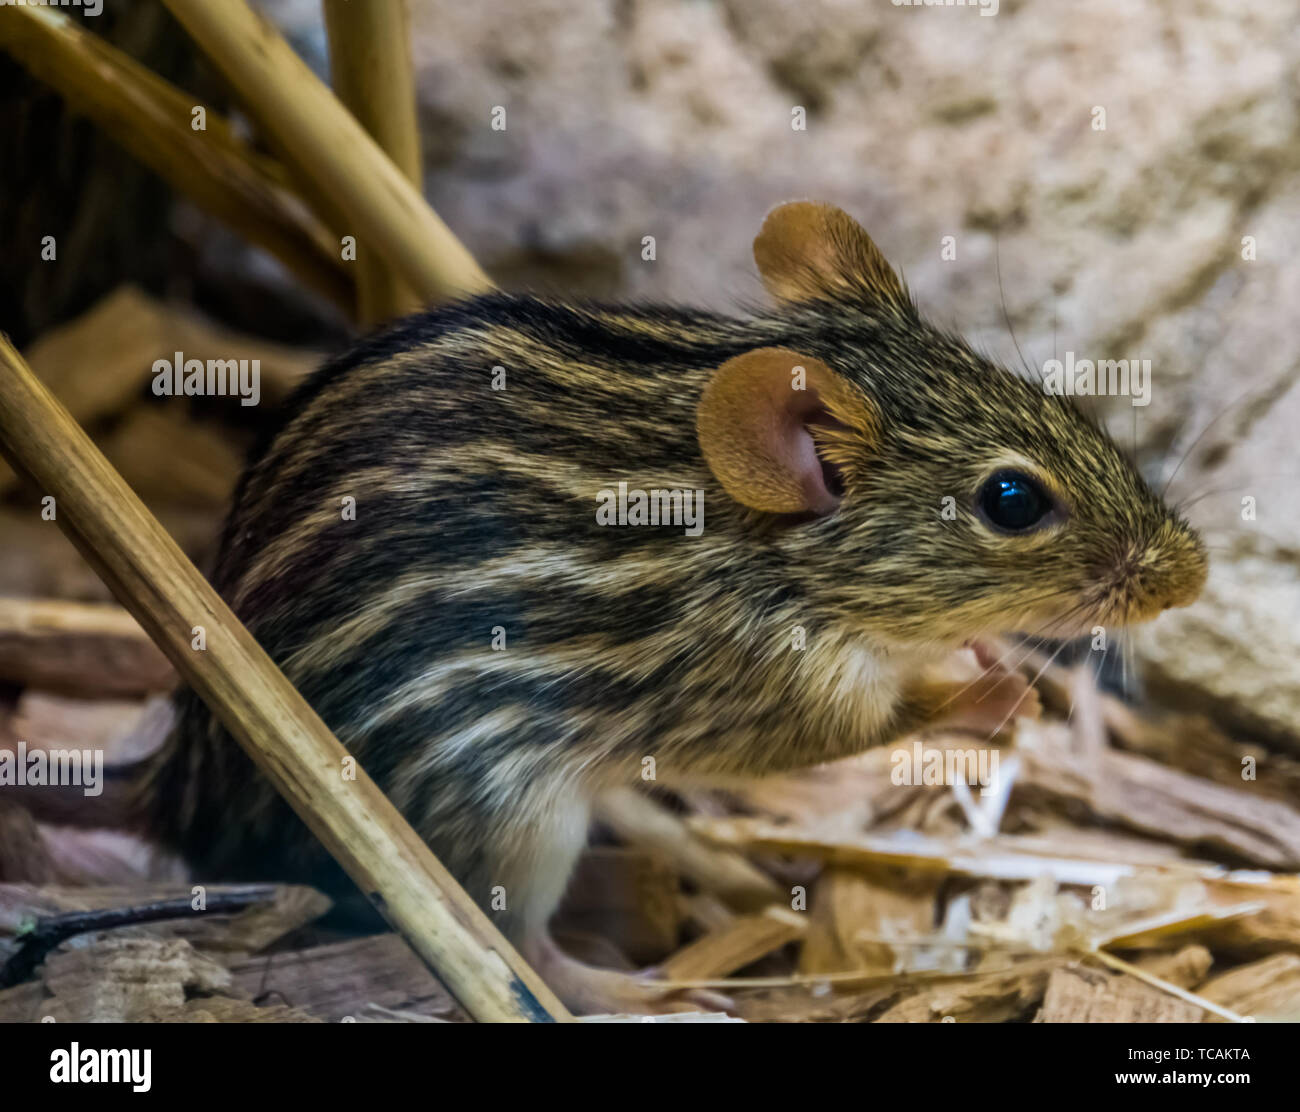 closeup portrait of a barbary striped grass mouse, popular tropical rodent from Africa, small cute pets Stock Photo